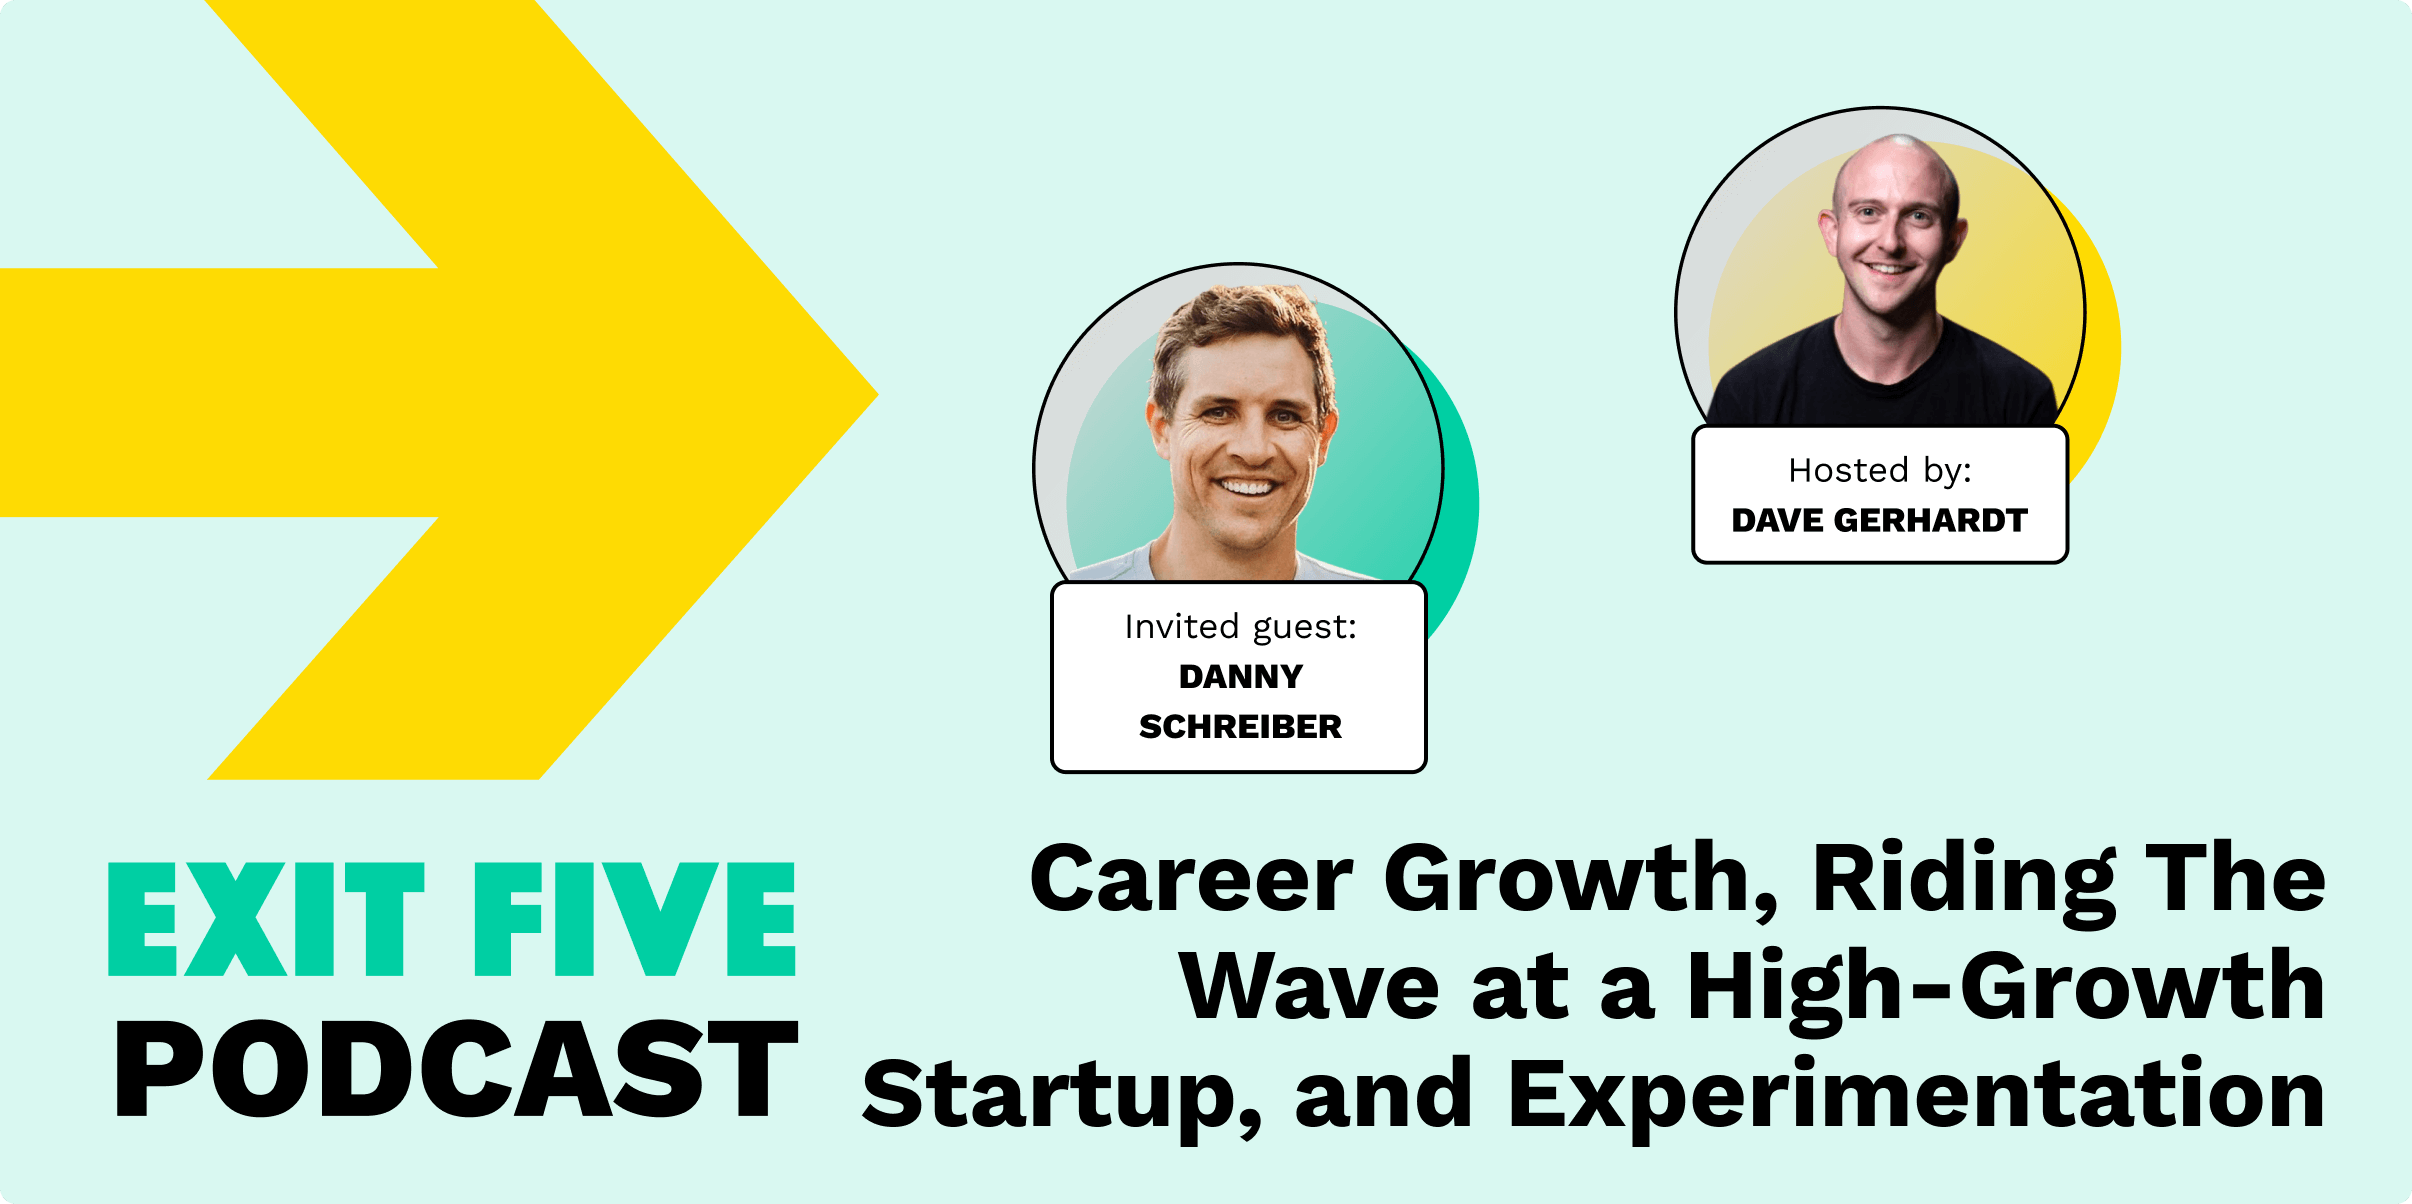 Career Growth, Riding The Wave at a High-Growth Startup, Marketing Experiments and more with Danny Schreiber